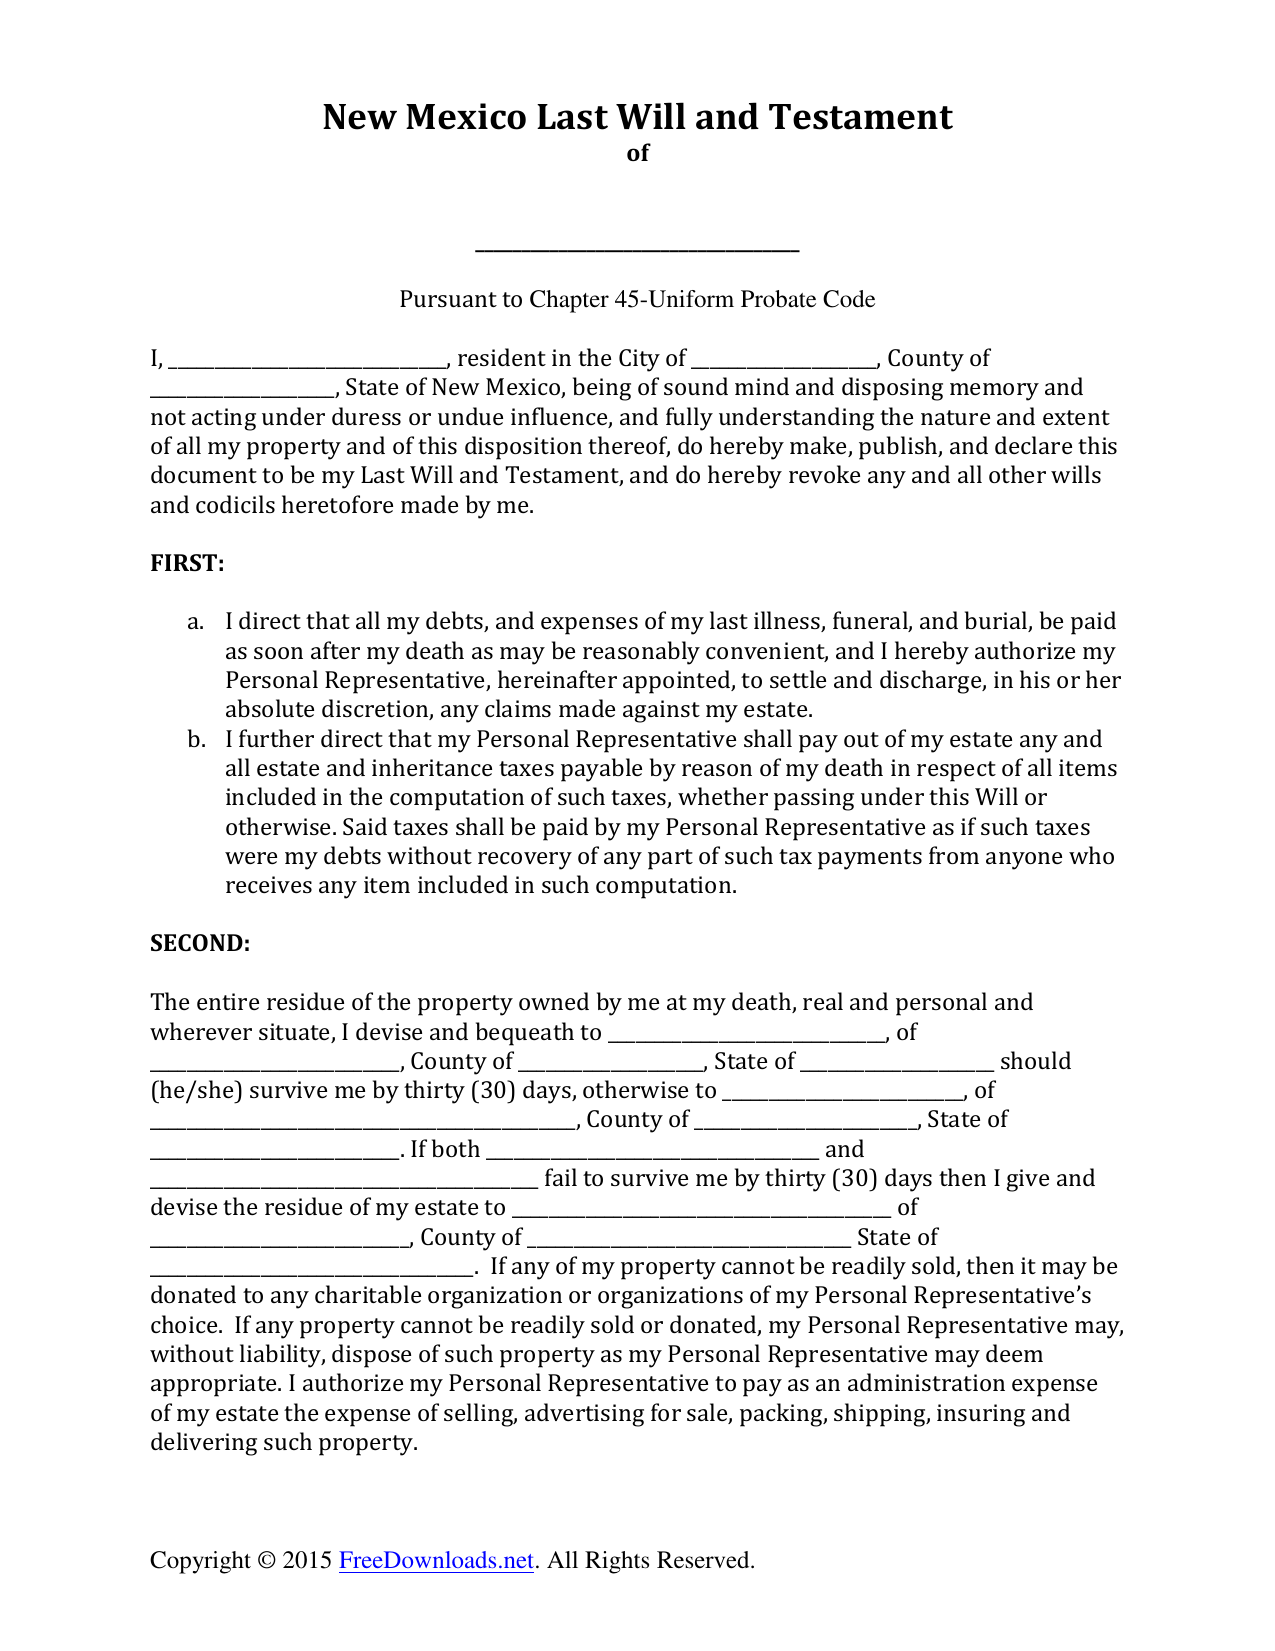 download-new-mexico-last-will-and-testament-form-pdf-rtf-word